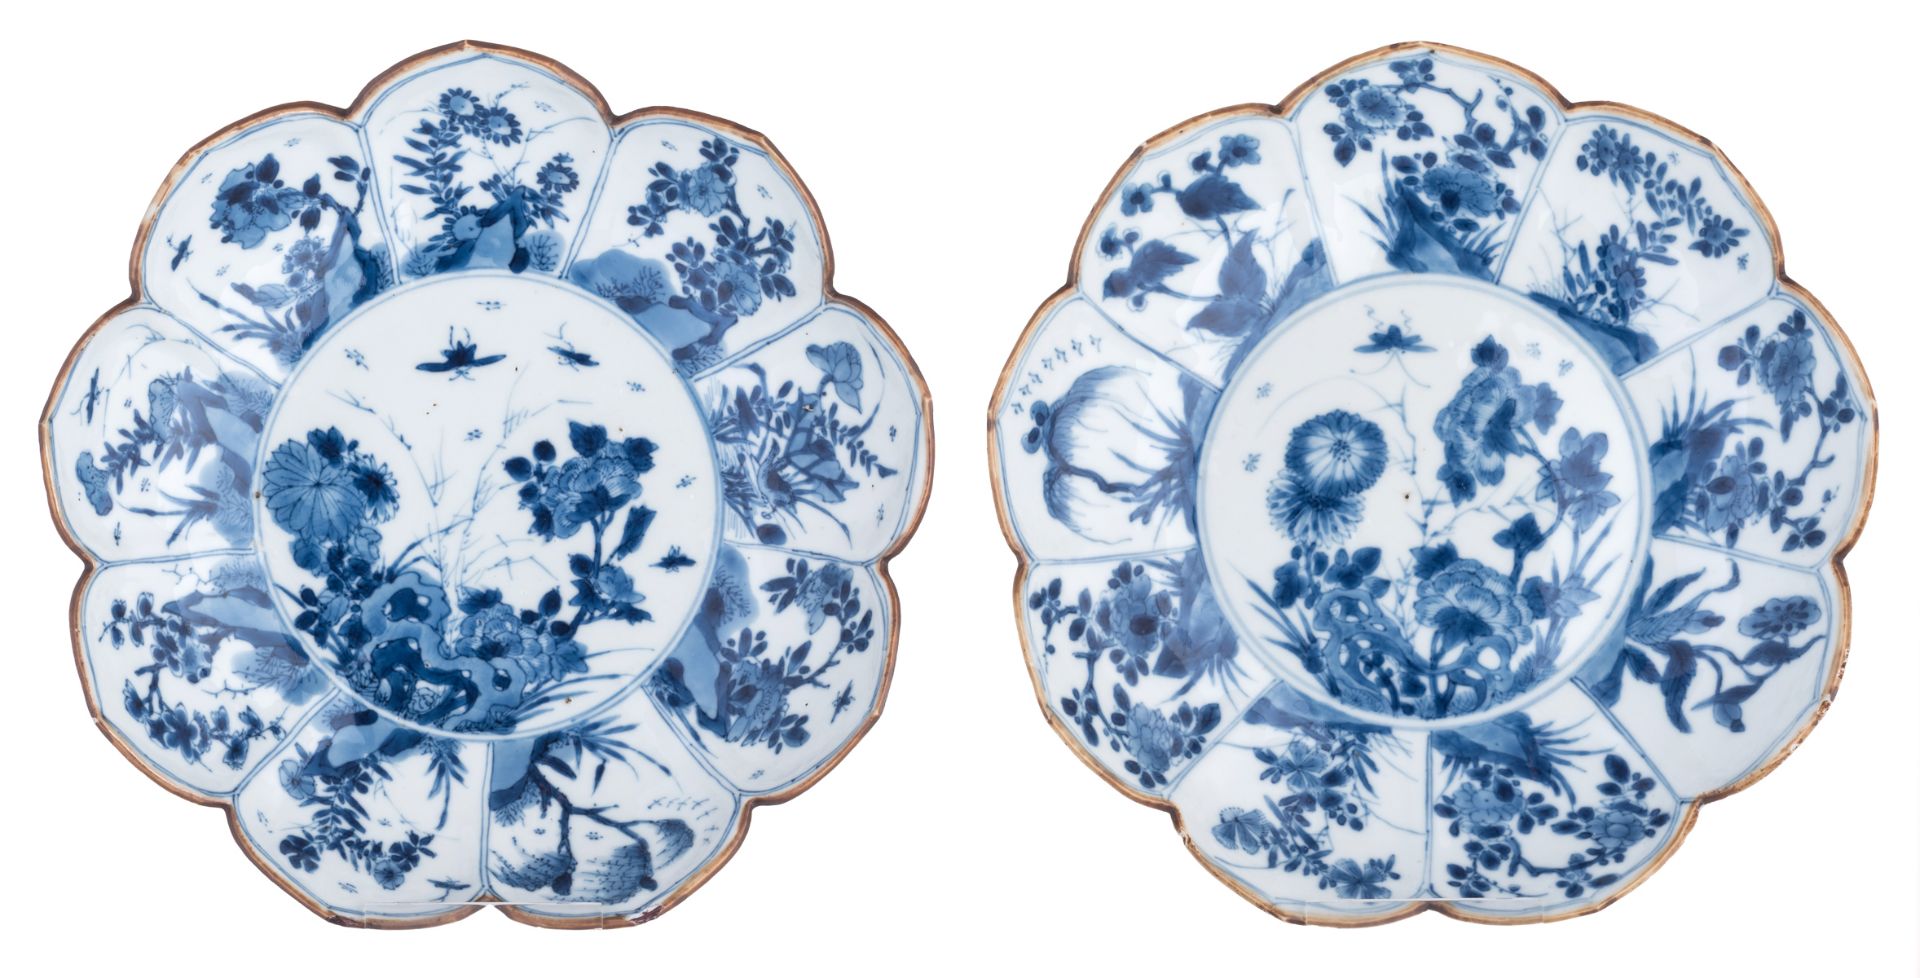 Two Chinese blue and white magnolia flower shaped saucers, decorated with rocks, flowering branches